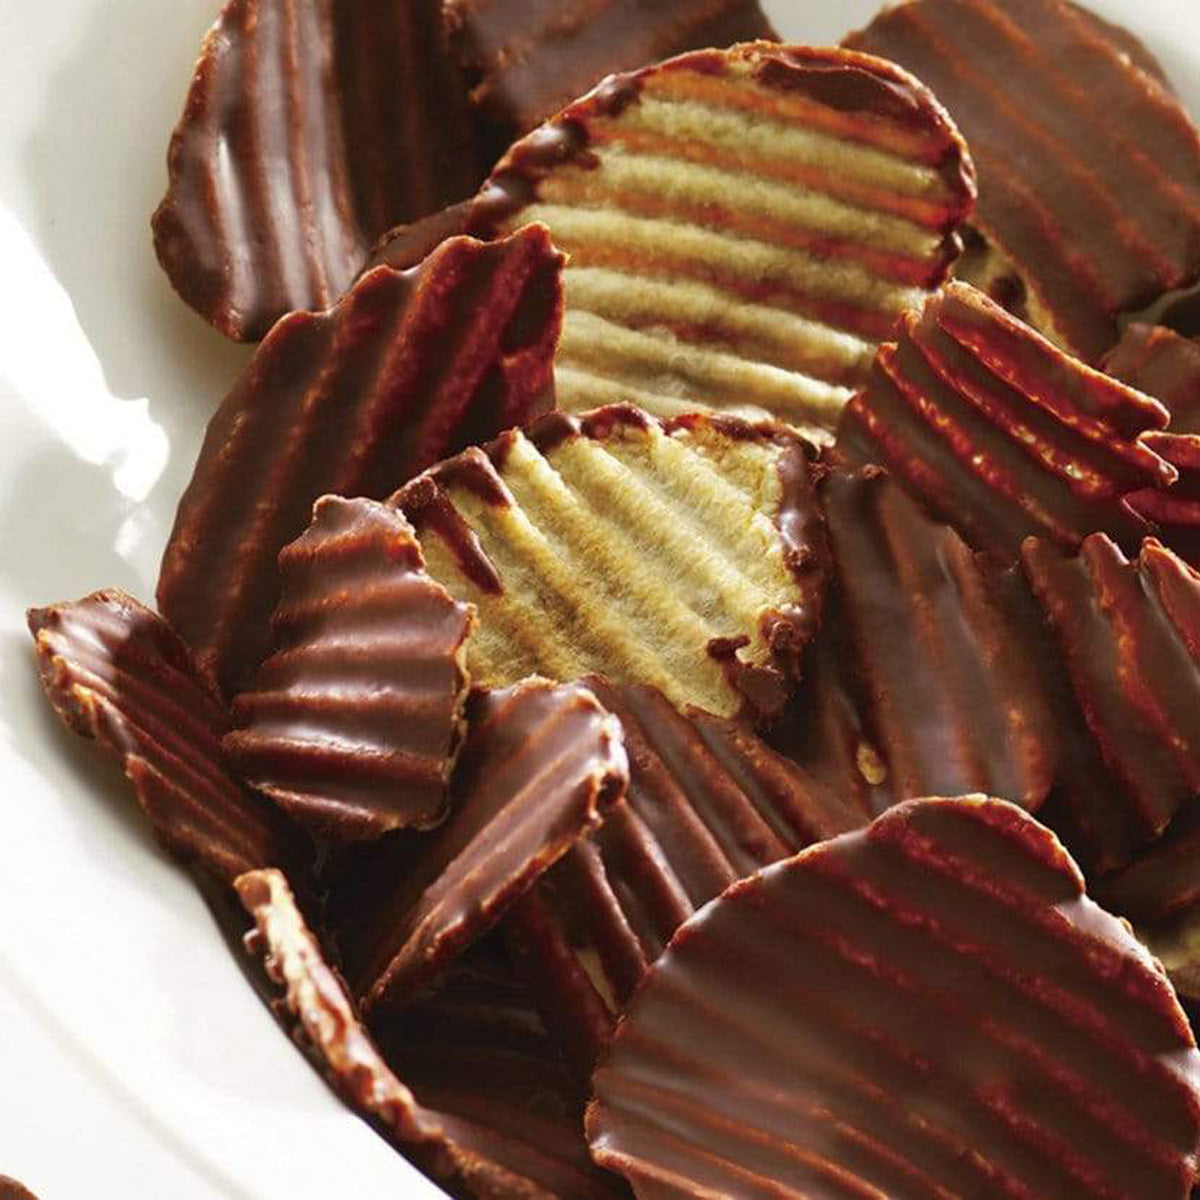 ROYCE' Chocolate - Potatochip Chocolate "Original" - Image shows brown chocolate-covered potato chips with a ridged texture, as placed on a white plate.